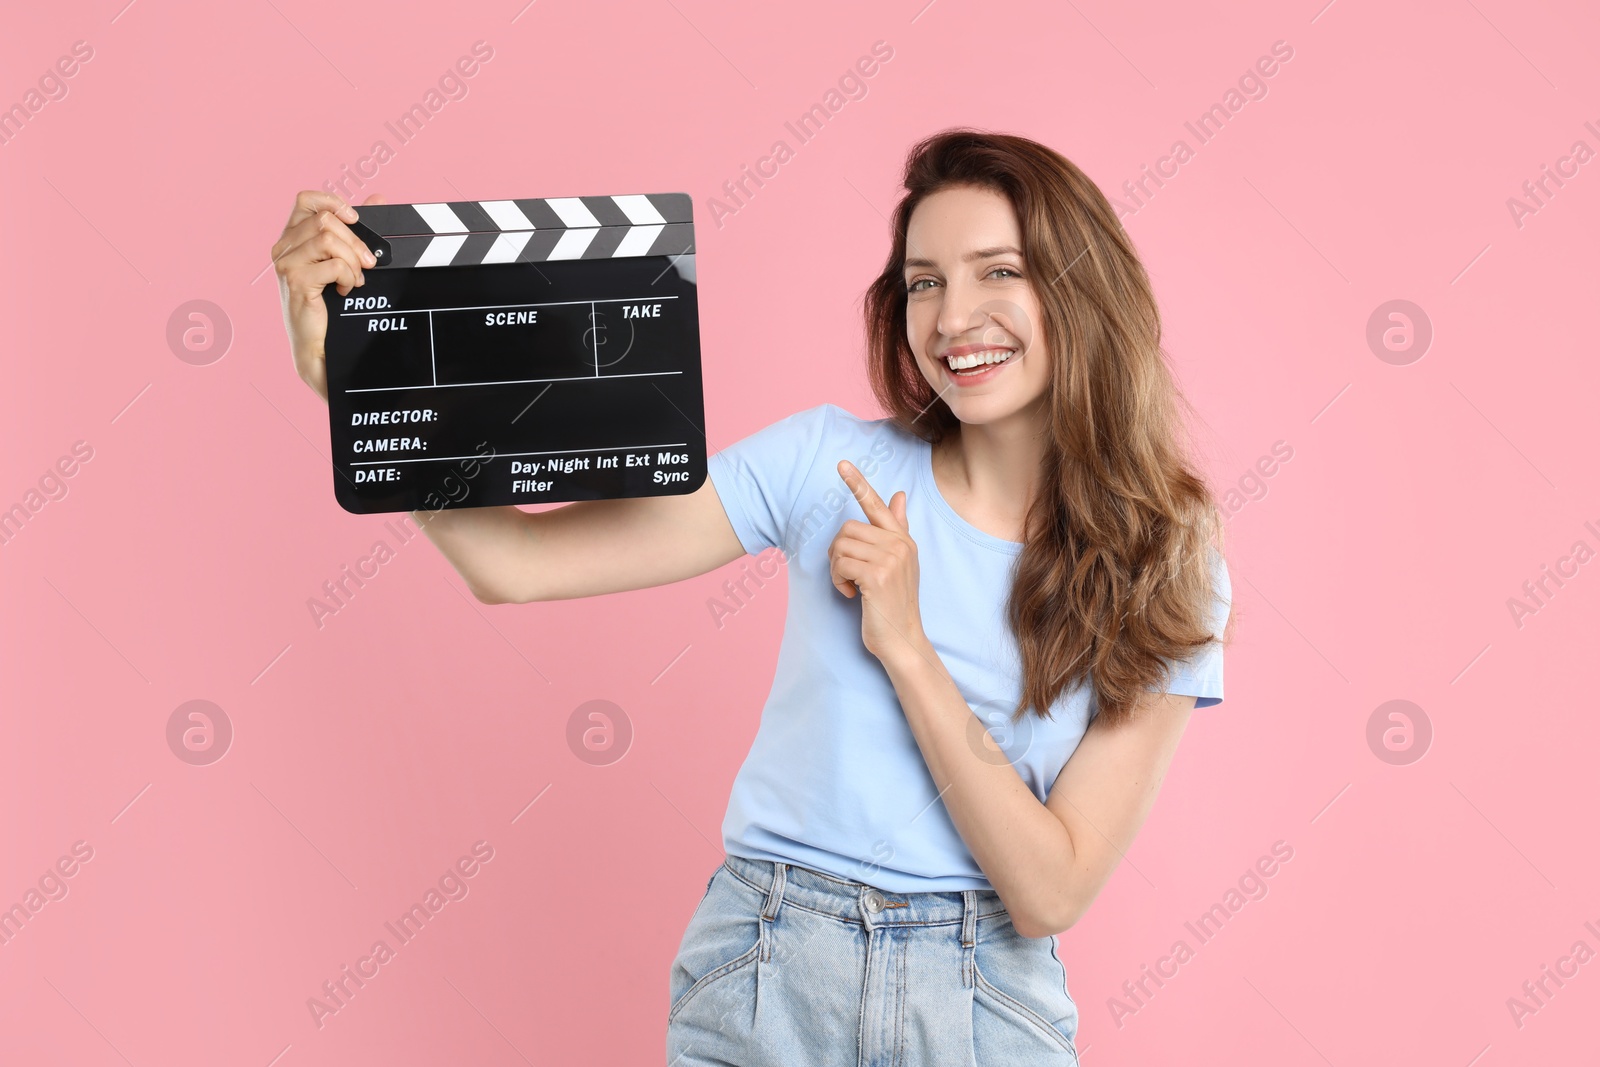 Photo of Making movie. Smiling woman pointing at clapperboard on pink background